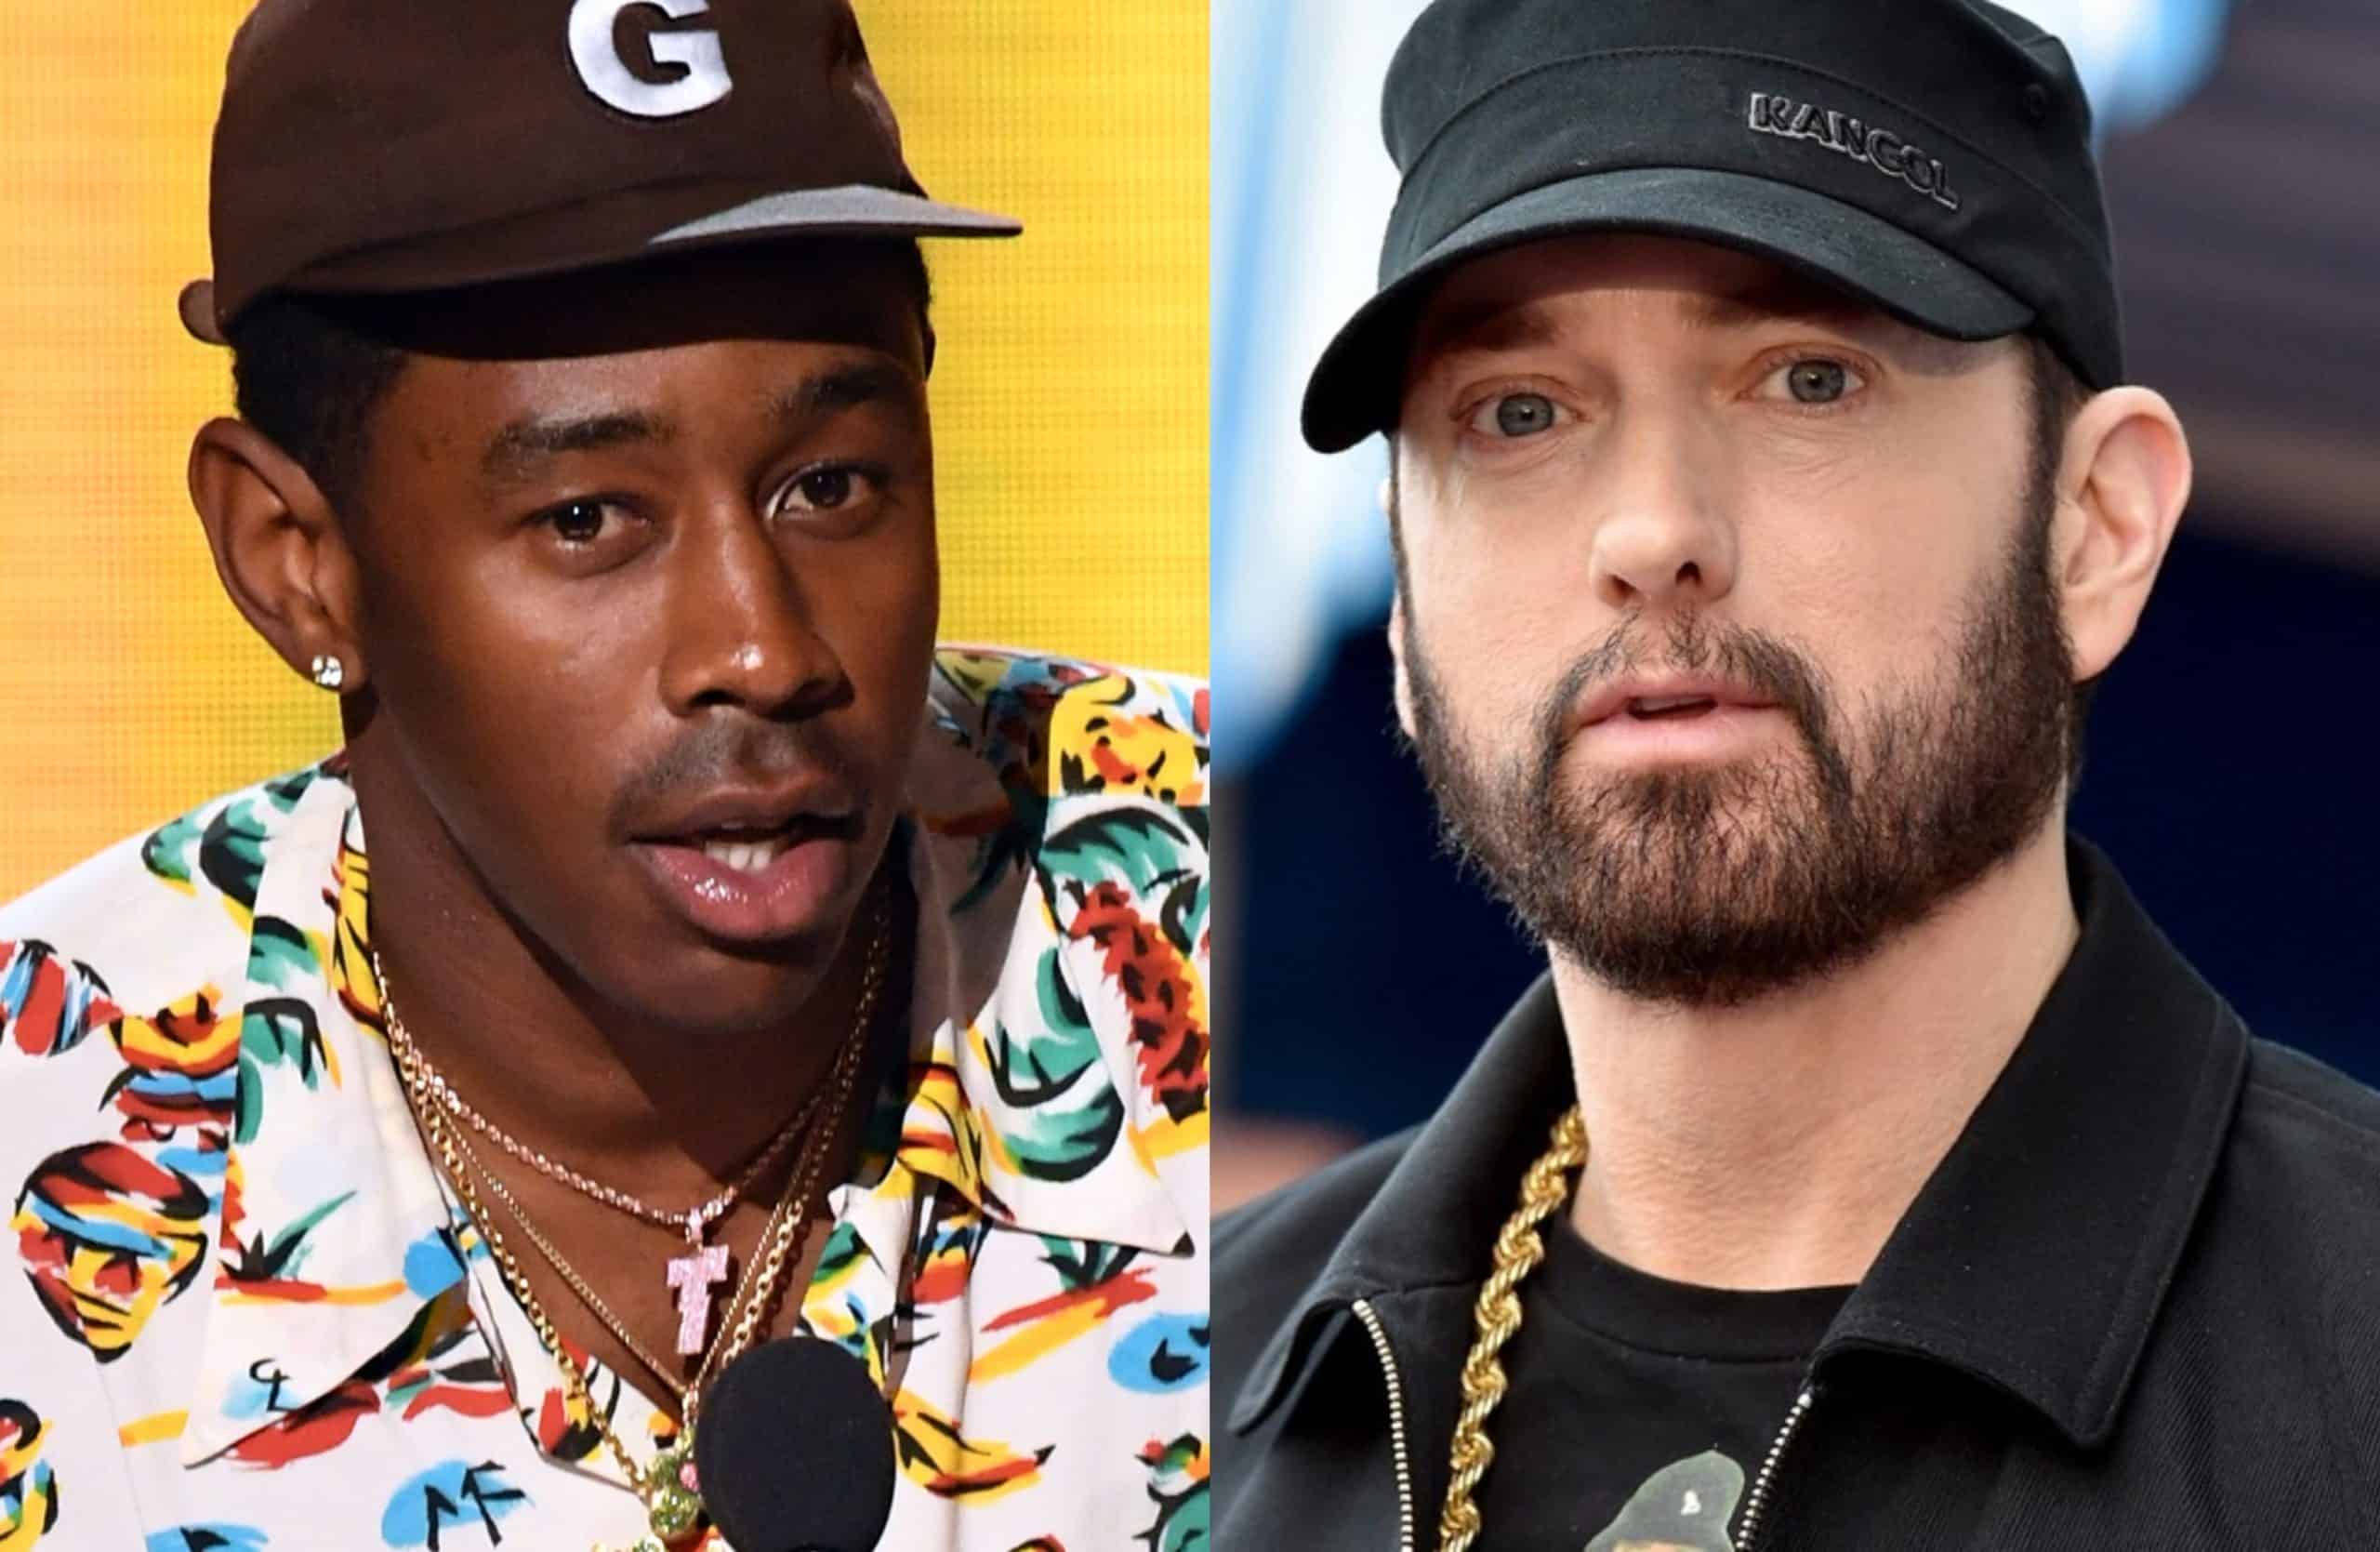 Tyler, The Creator expresses his admiration for Eminem